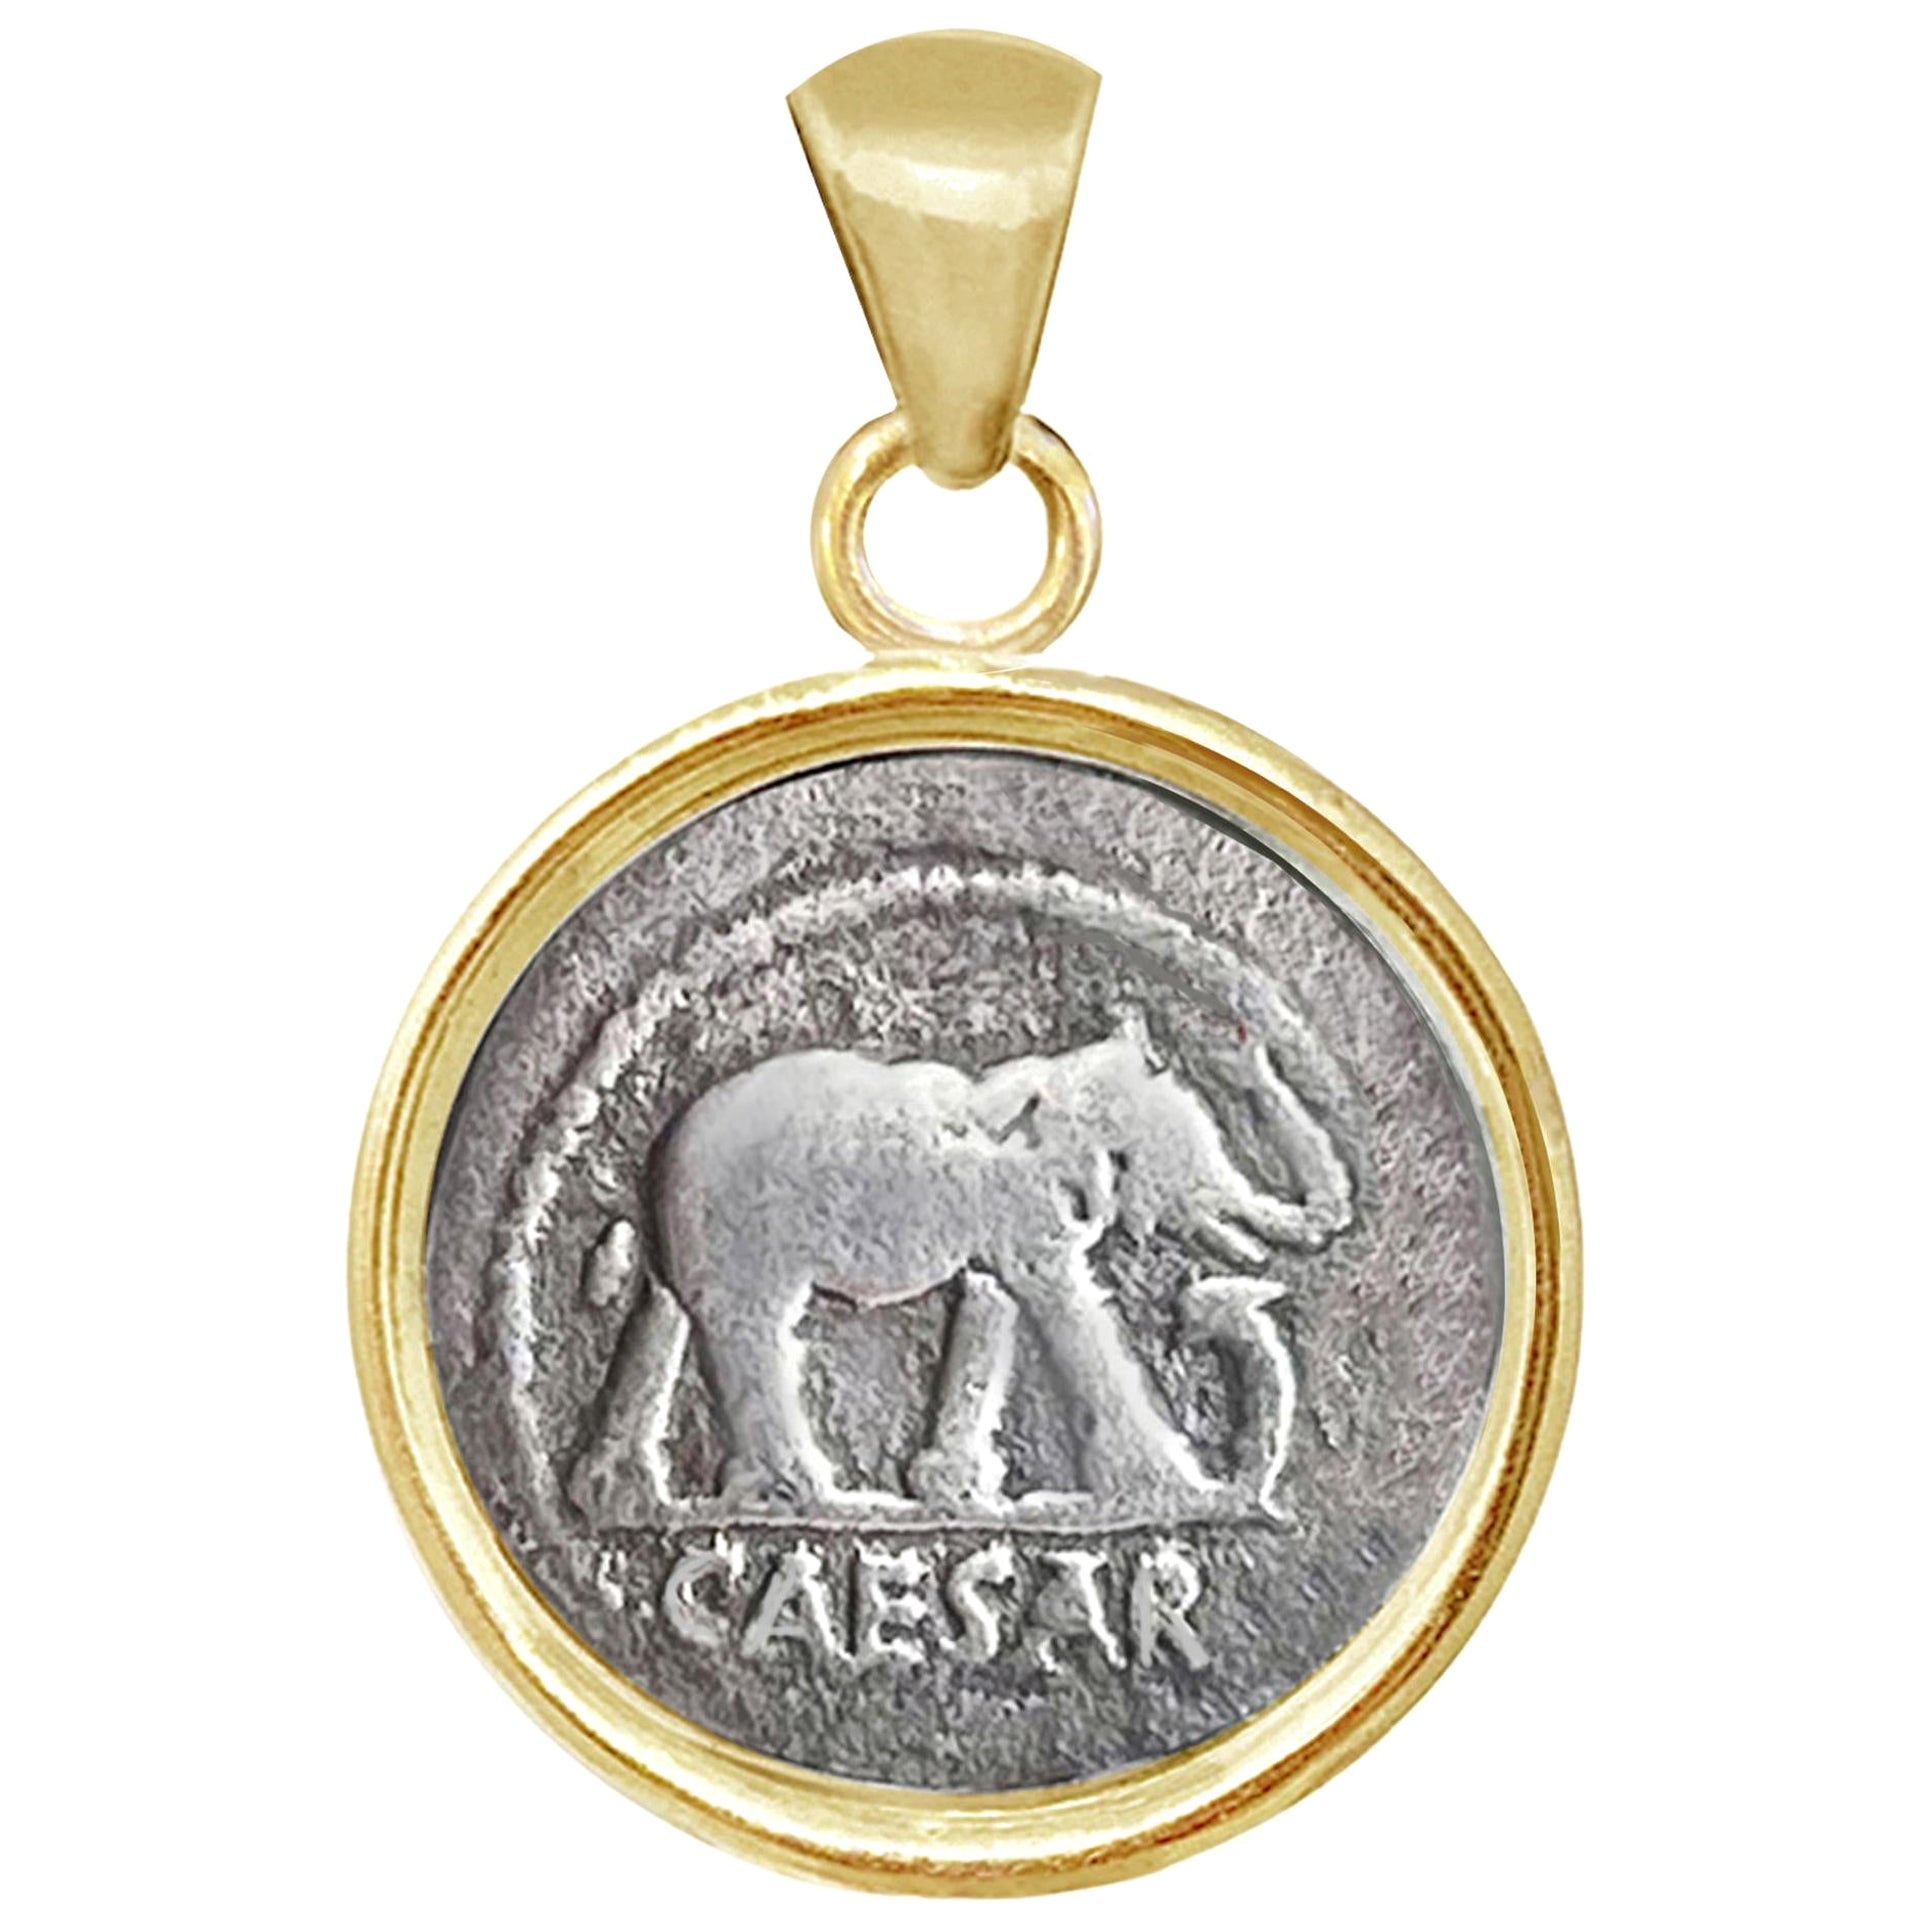 Roman Coin '49 BC' Gold Pendant Depicting an Elephant 'Minted by Julius Caesar' For Sale